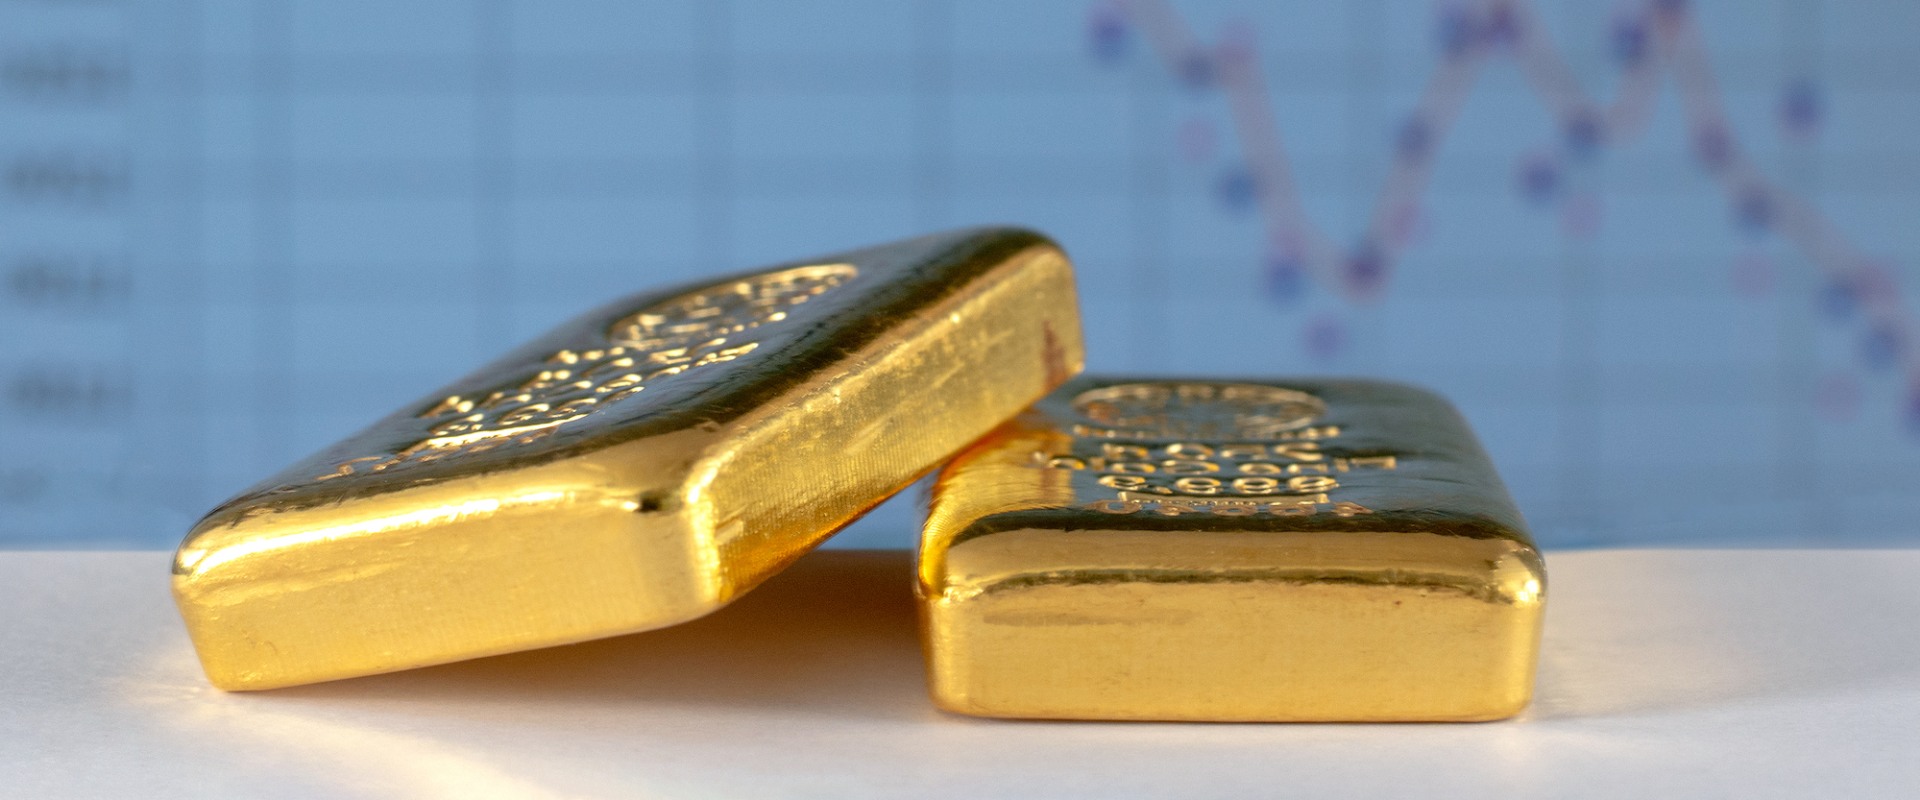 Is gold actually a good investment?